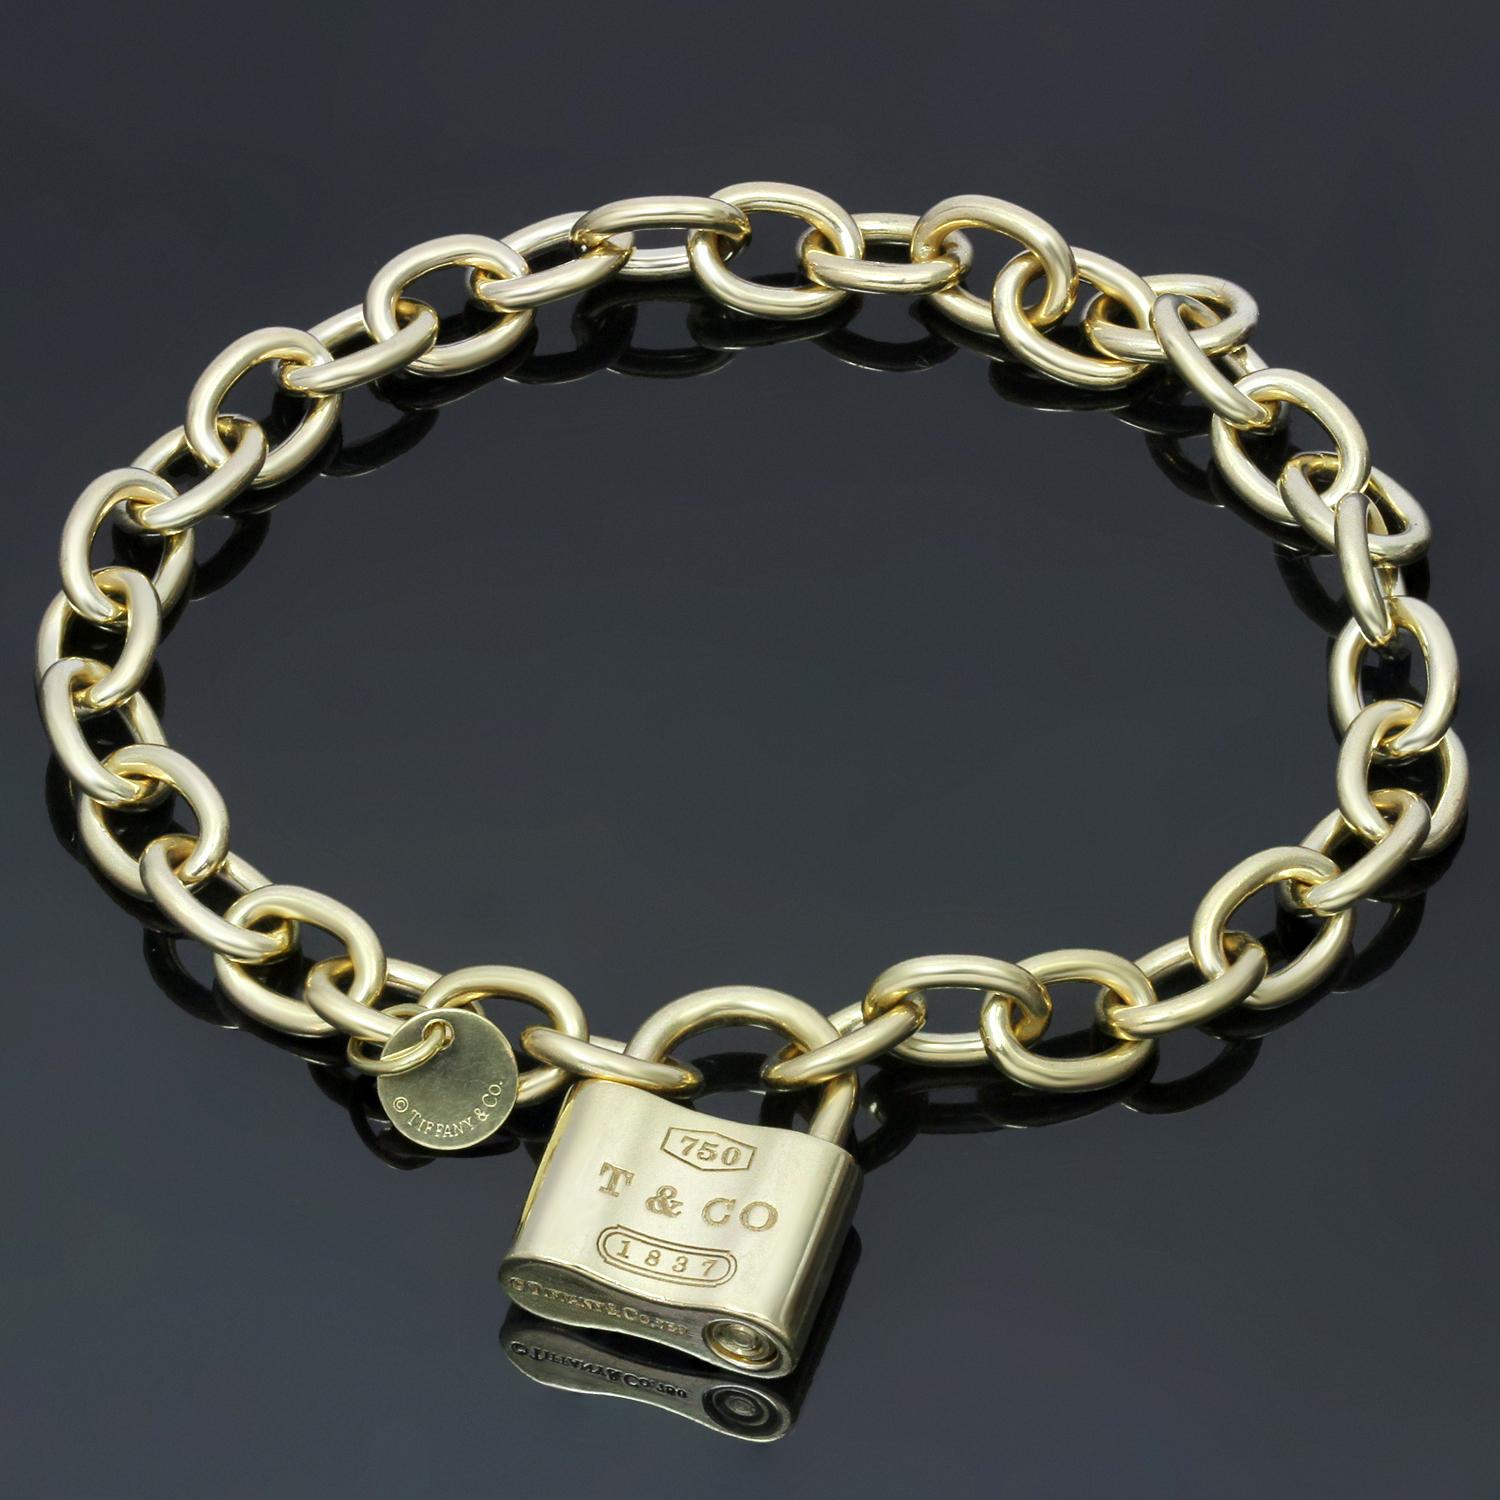 This chic Tiffany bracelet is crafted in 18k yellow gold and features a round link chain completed with an elegant lock-shaped signed clasp. Made in United States circa 2000s. Measurements: 0.75